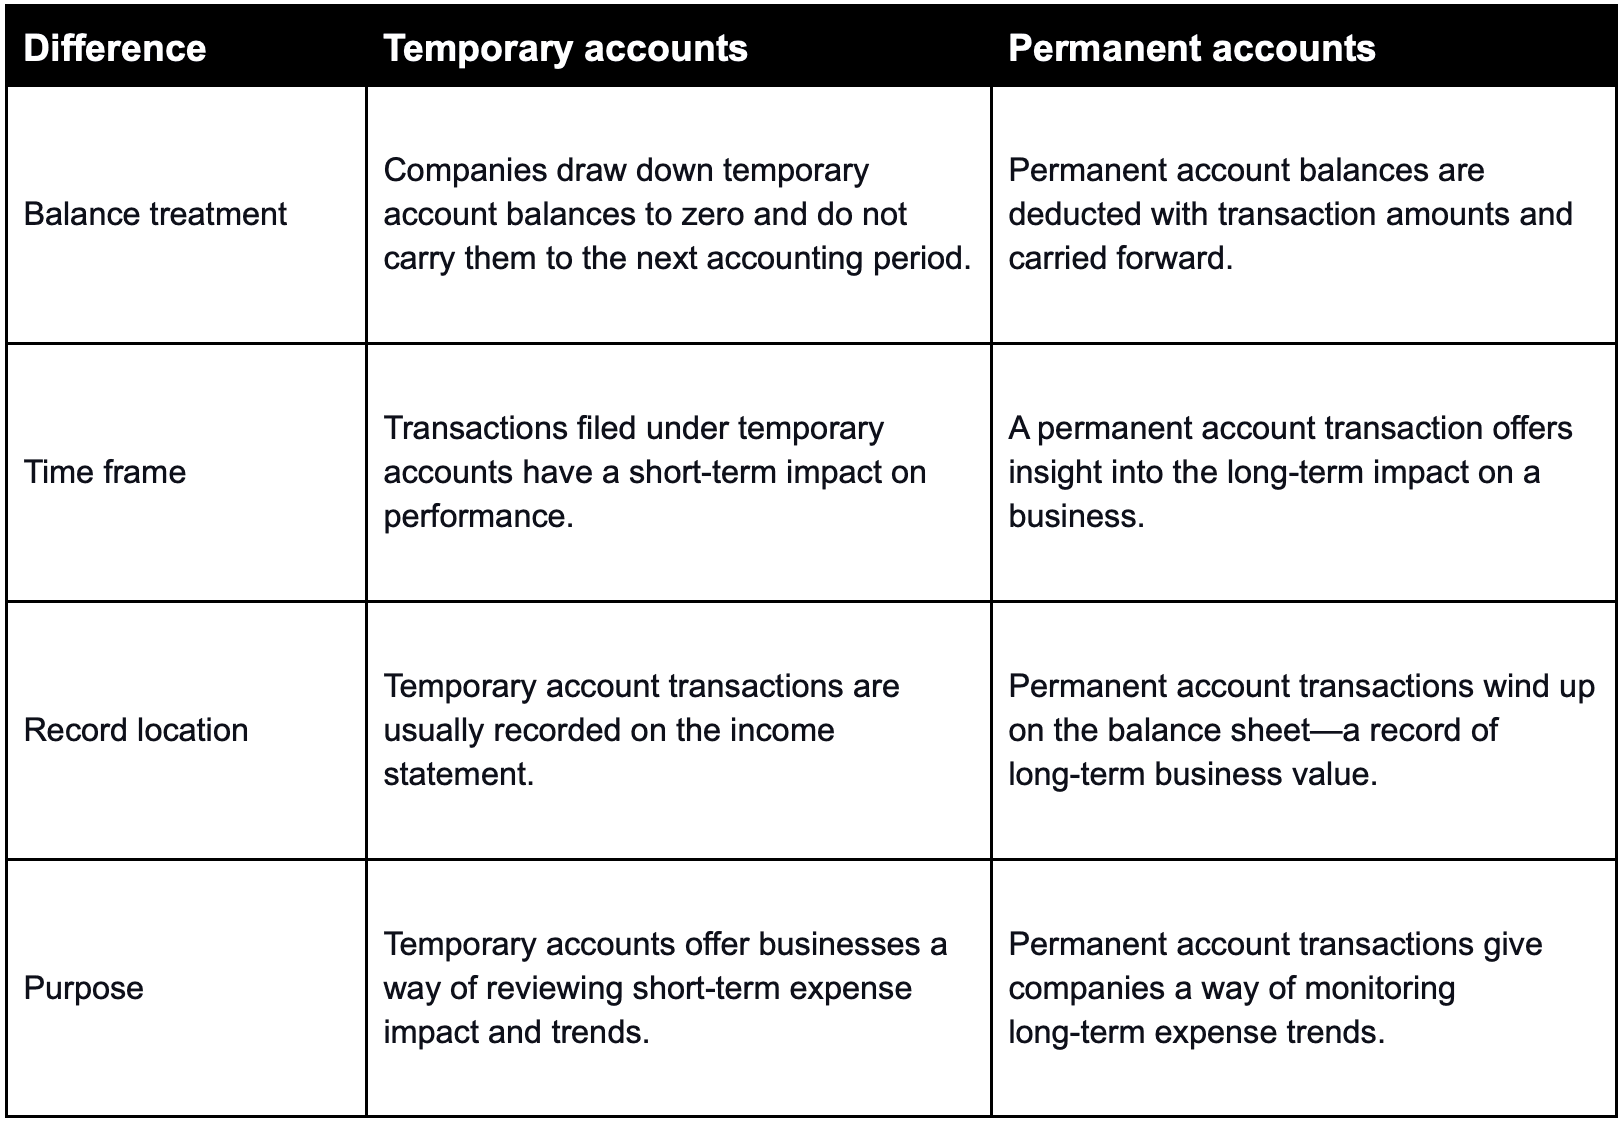 Differences between temporary and permanent accounts